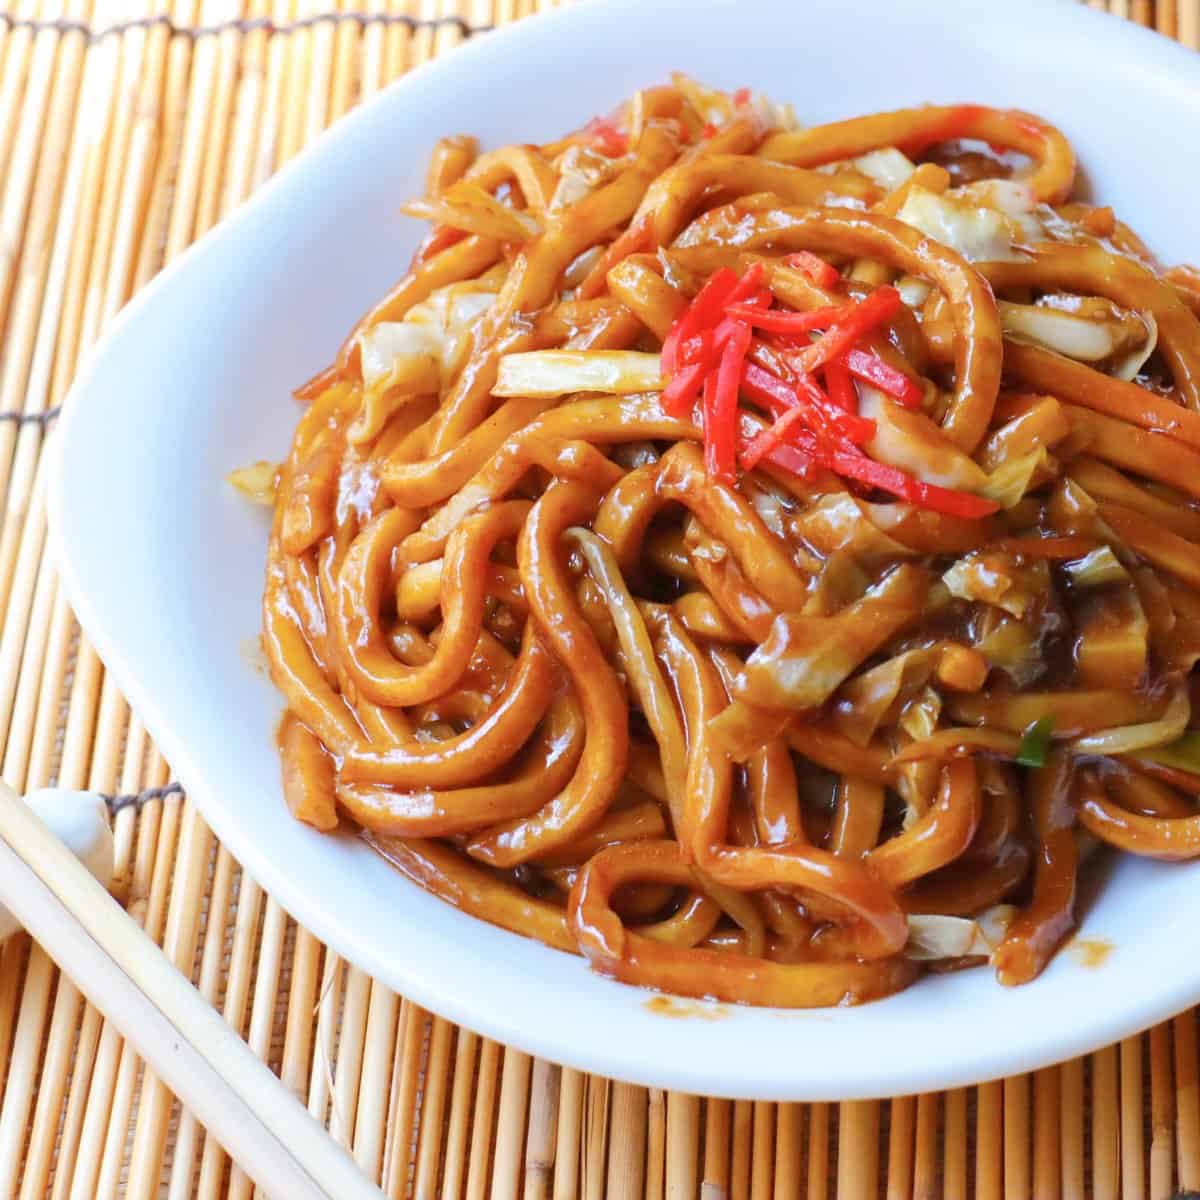 What is yaki udon